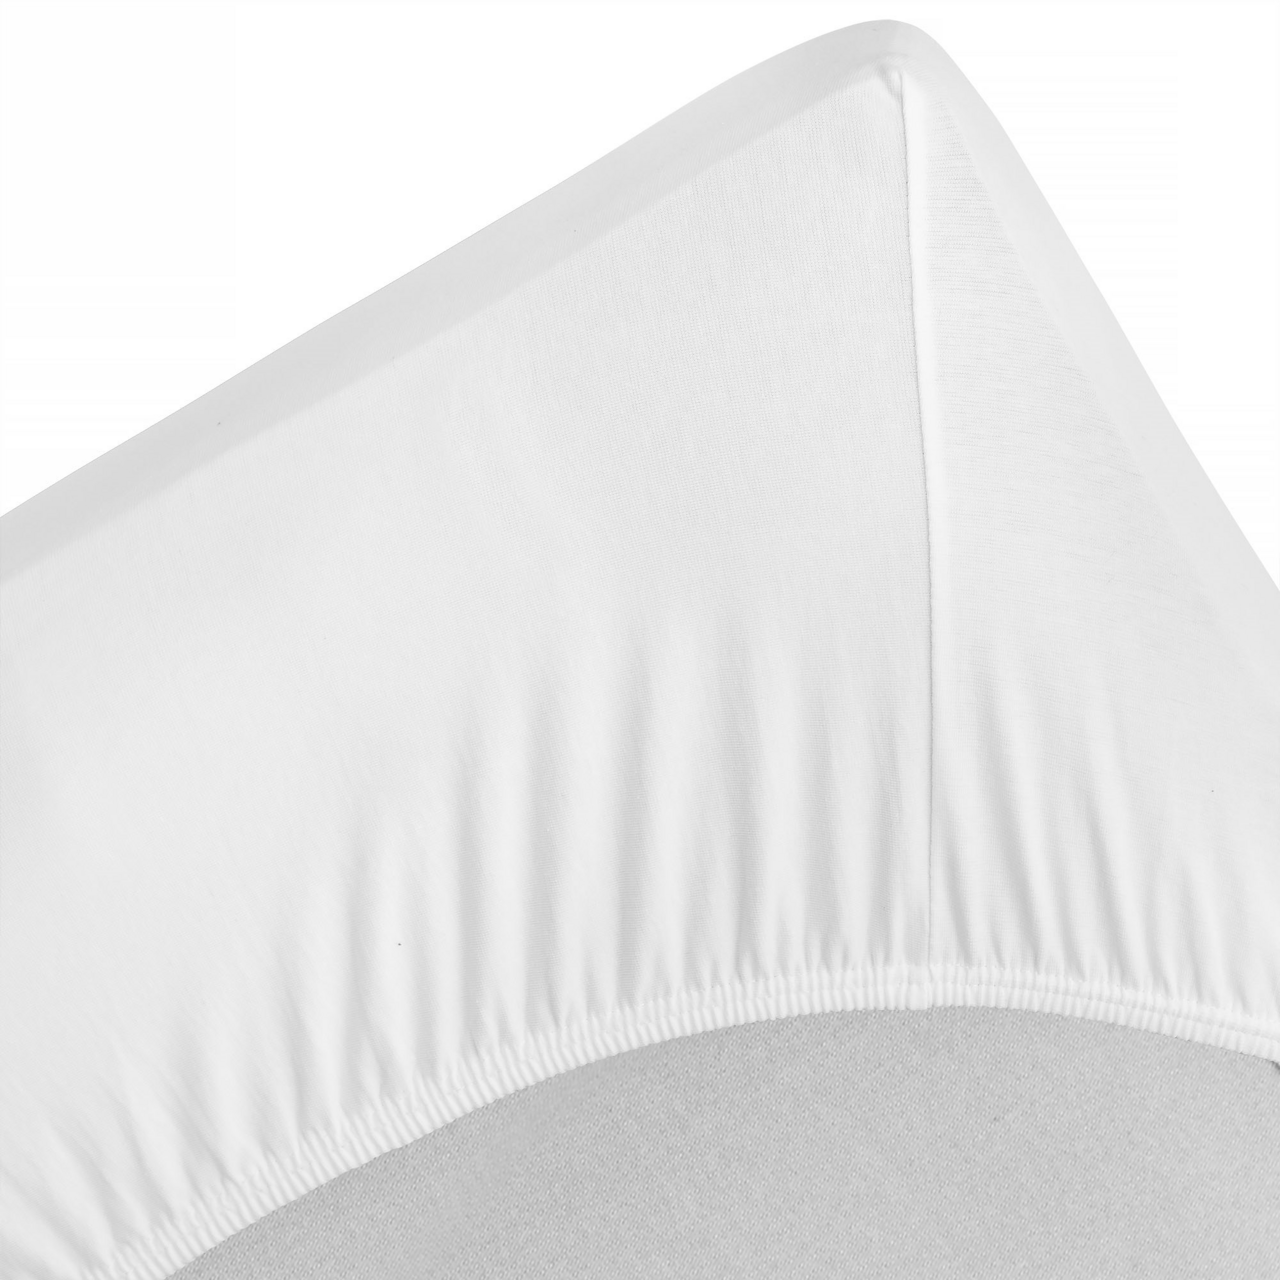 Mattress cover, fitted sheet 105x200 cm, White